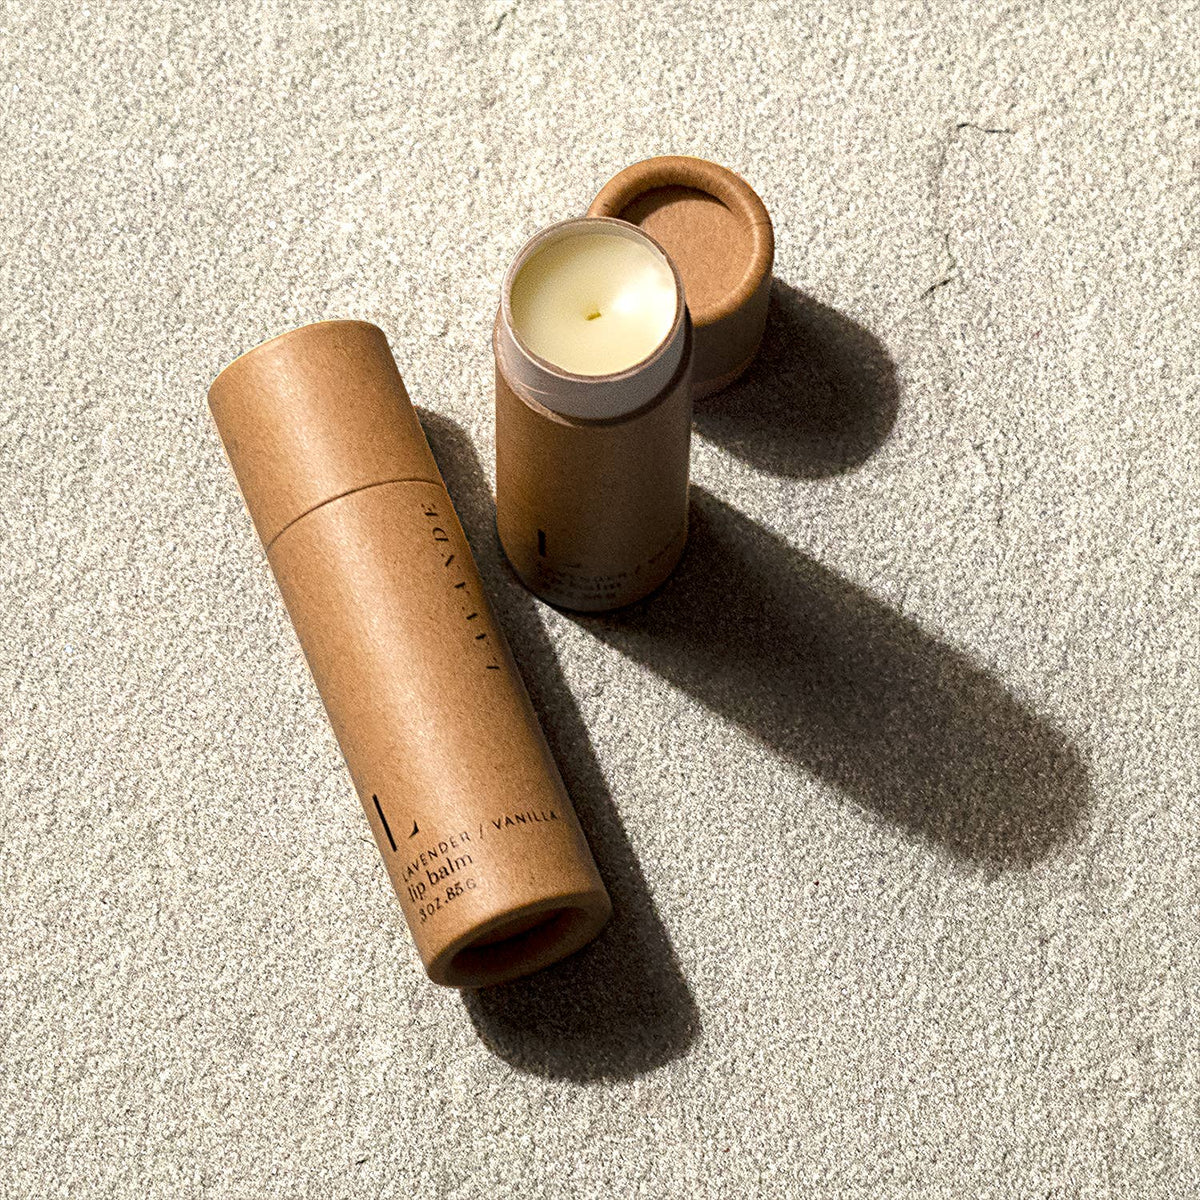 Two Lavande lip balms with natural ingredients in eco-friendly, wooden containers with caps removed, placed on a textured surface under sunlight casting sharp shadows.